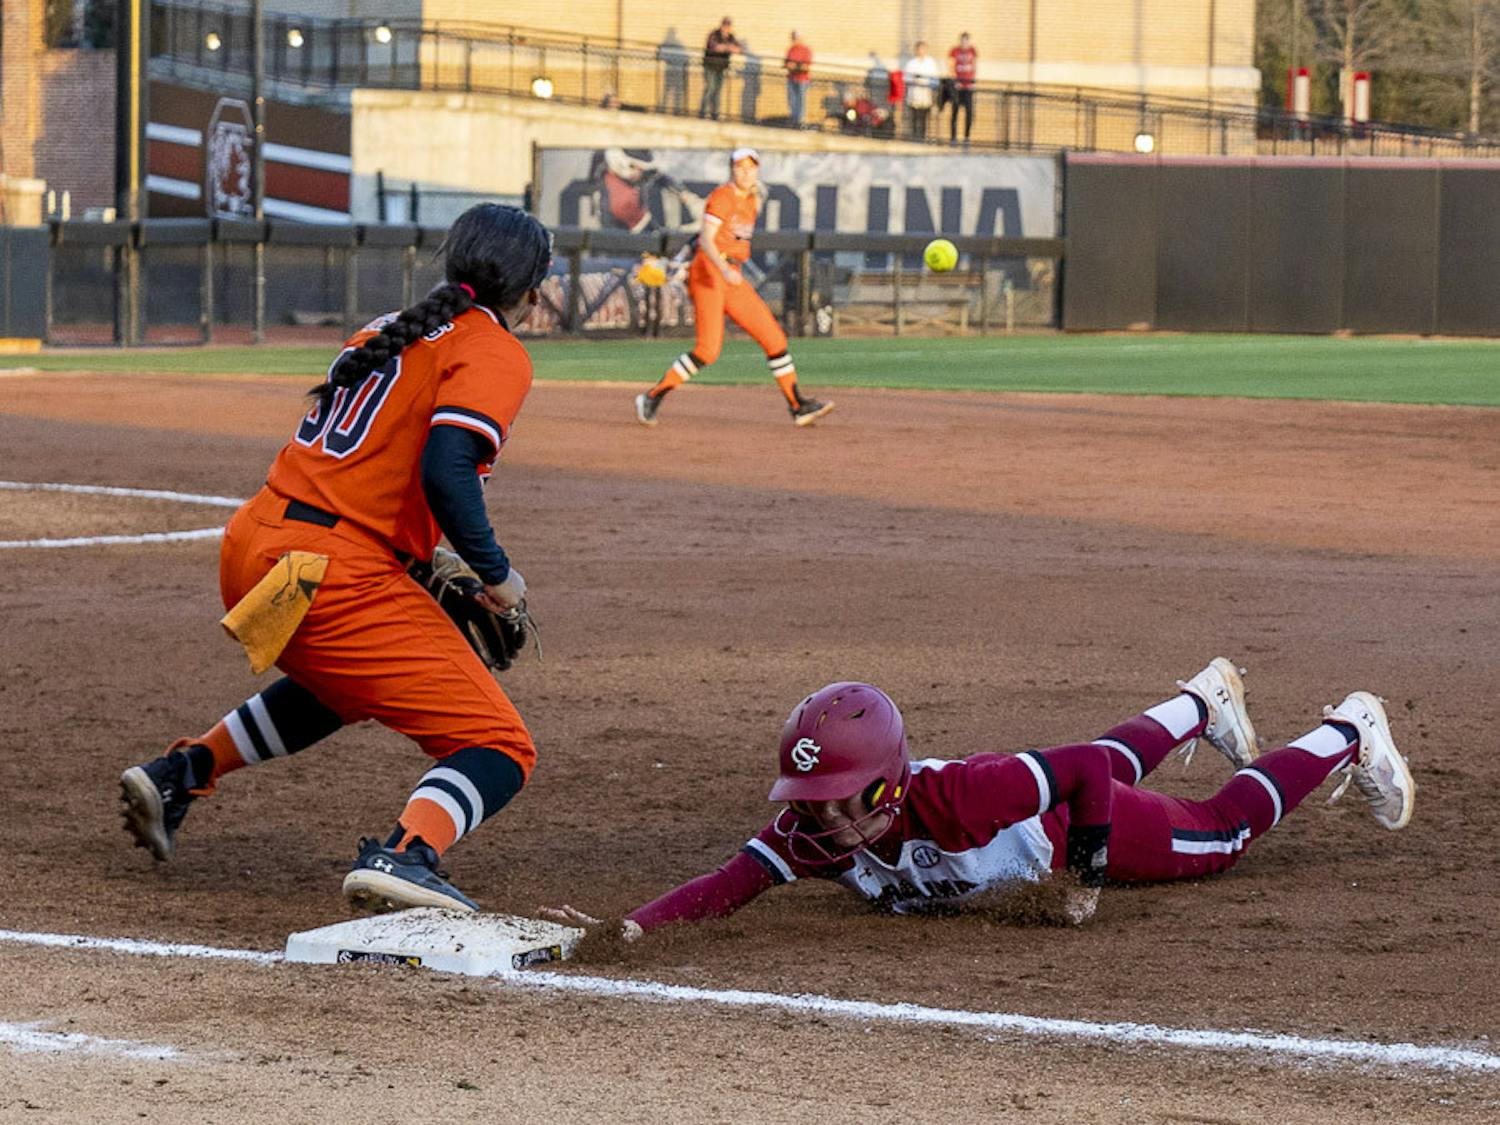 Sophomore outfielder Marissa Gonzalez is declared safe after sliding back to first base during the matchup between South Carolina and Campbell at Beckham Field on Feb. 19, 2023. The Gamecocks beat the Camels 2-1.